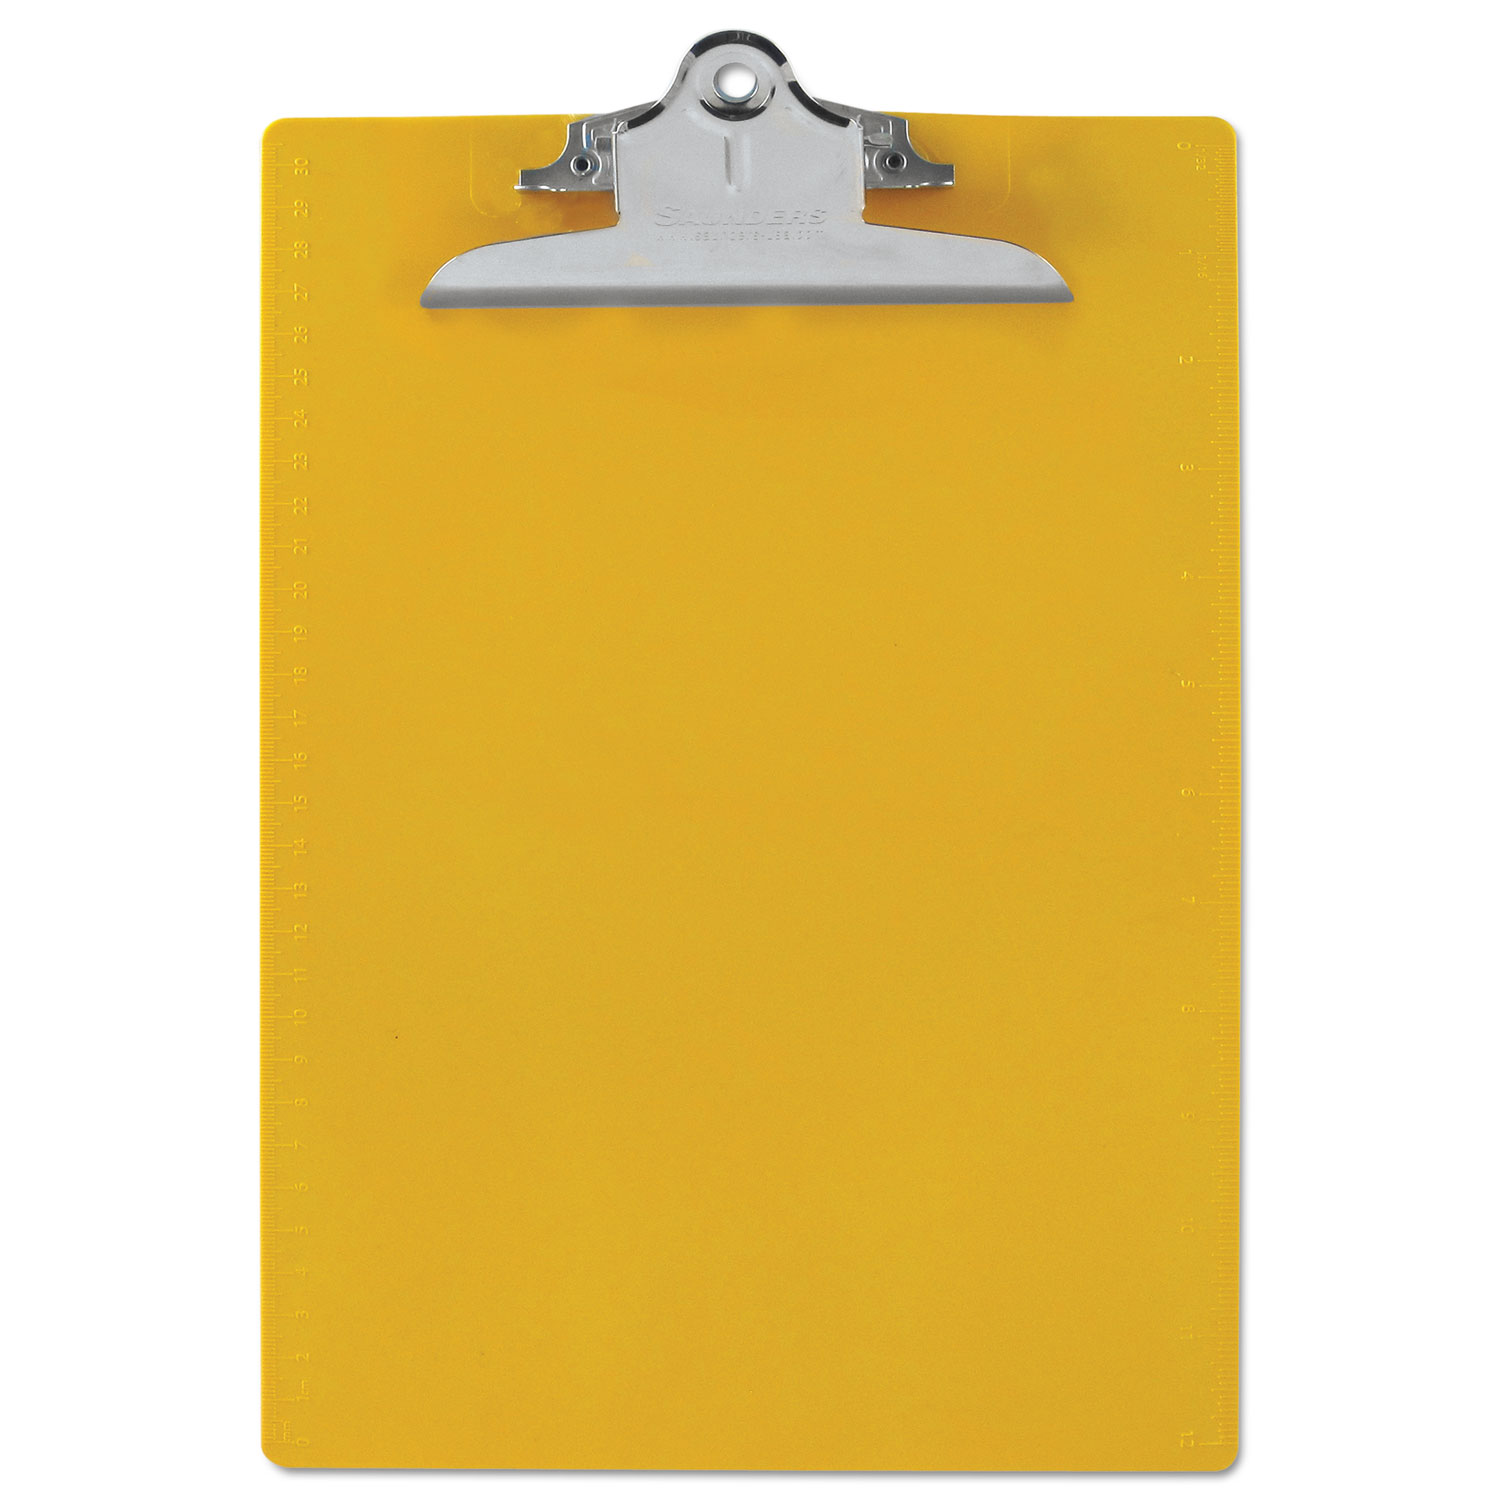 Recycled Plastic Clipboard w/Ruler Edge, 1 Clip Cap, 8 1/2 x 12 Sheets, Yellow